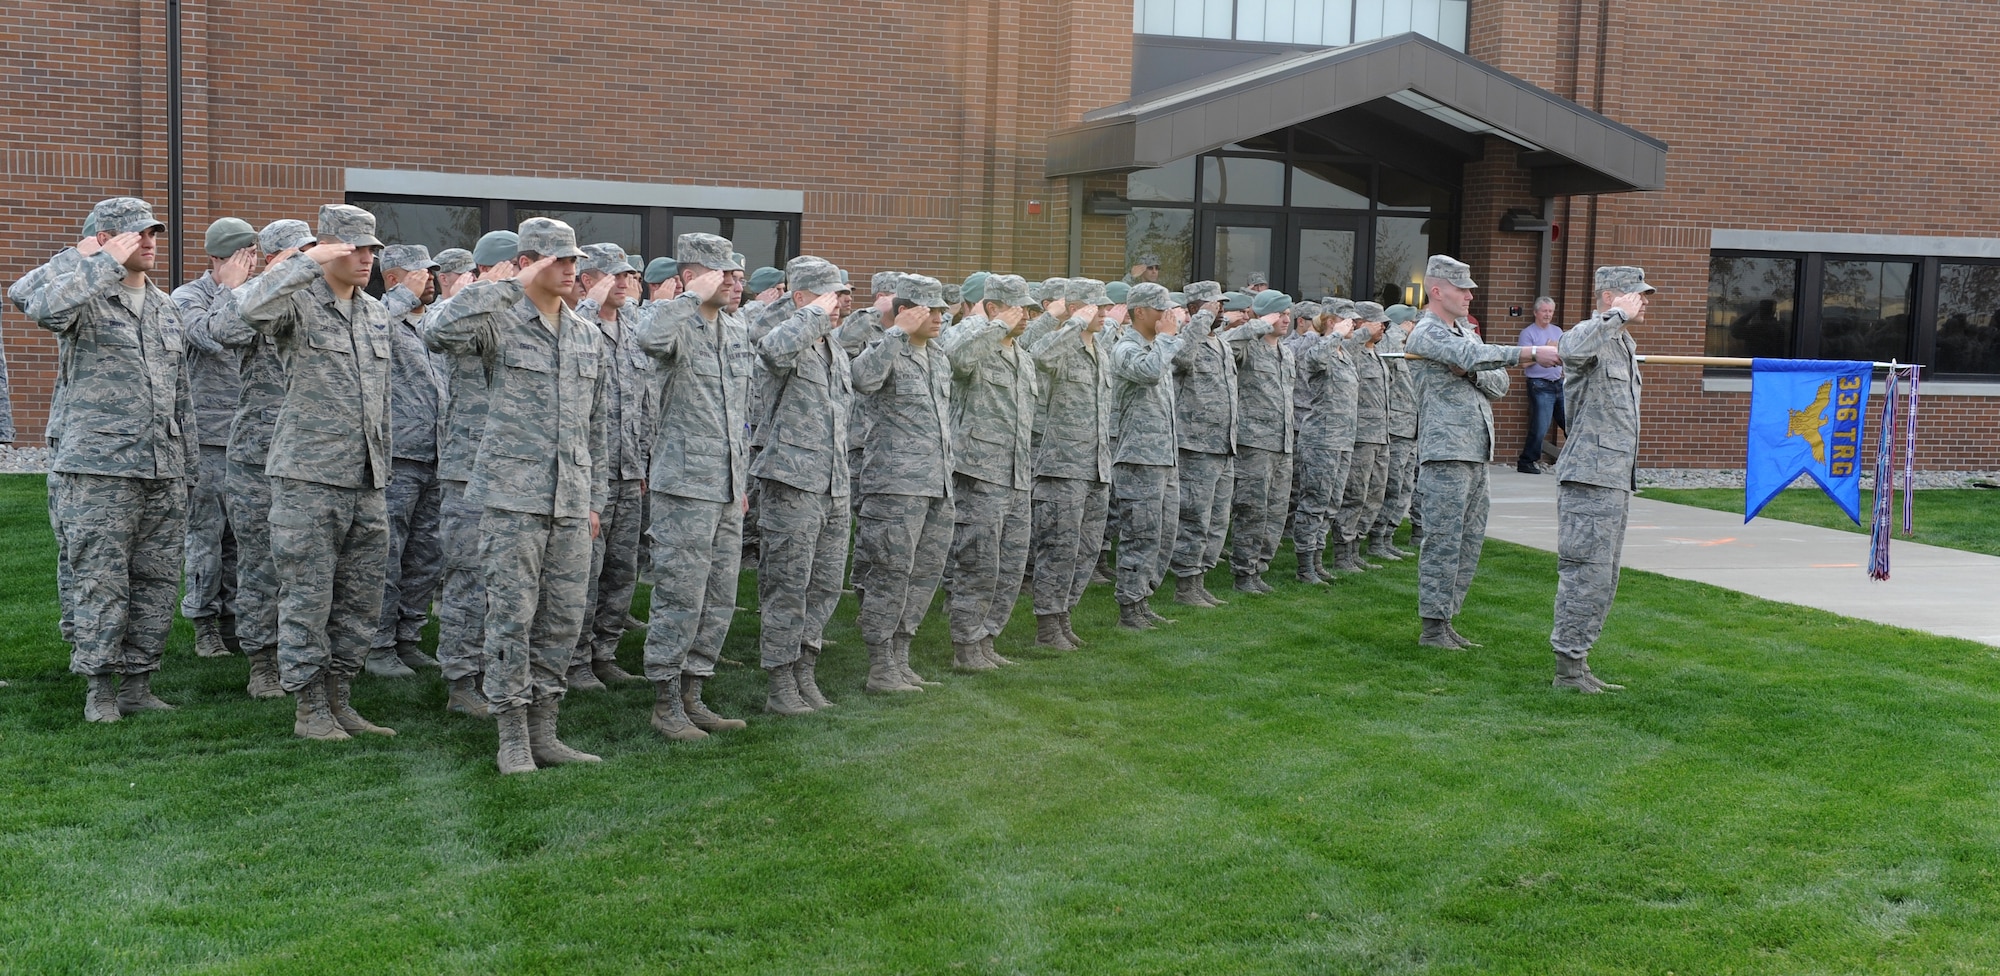 Members of Team Fairchild salute during a Retreat Ceremony honoring prisoners of war and those missing in action at Fairchild Air Force Base, Wash. Sept. 21, 2012. The ceremony was held at the 336th Training Group headquarters building flagpole. (U.S. Air Force photo by Staff Sgt. Michael Means)